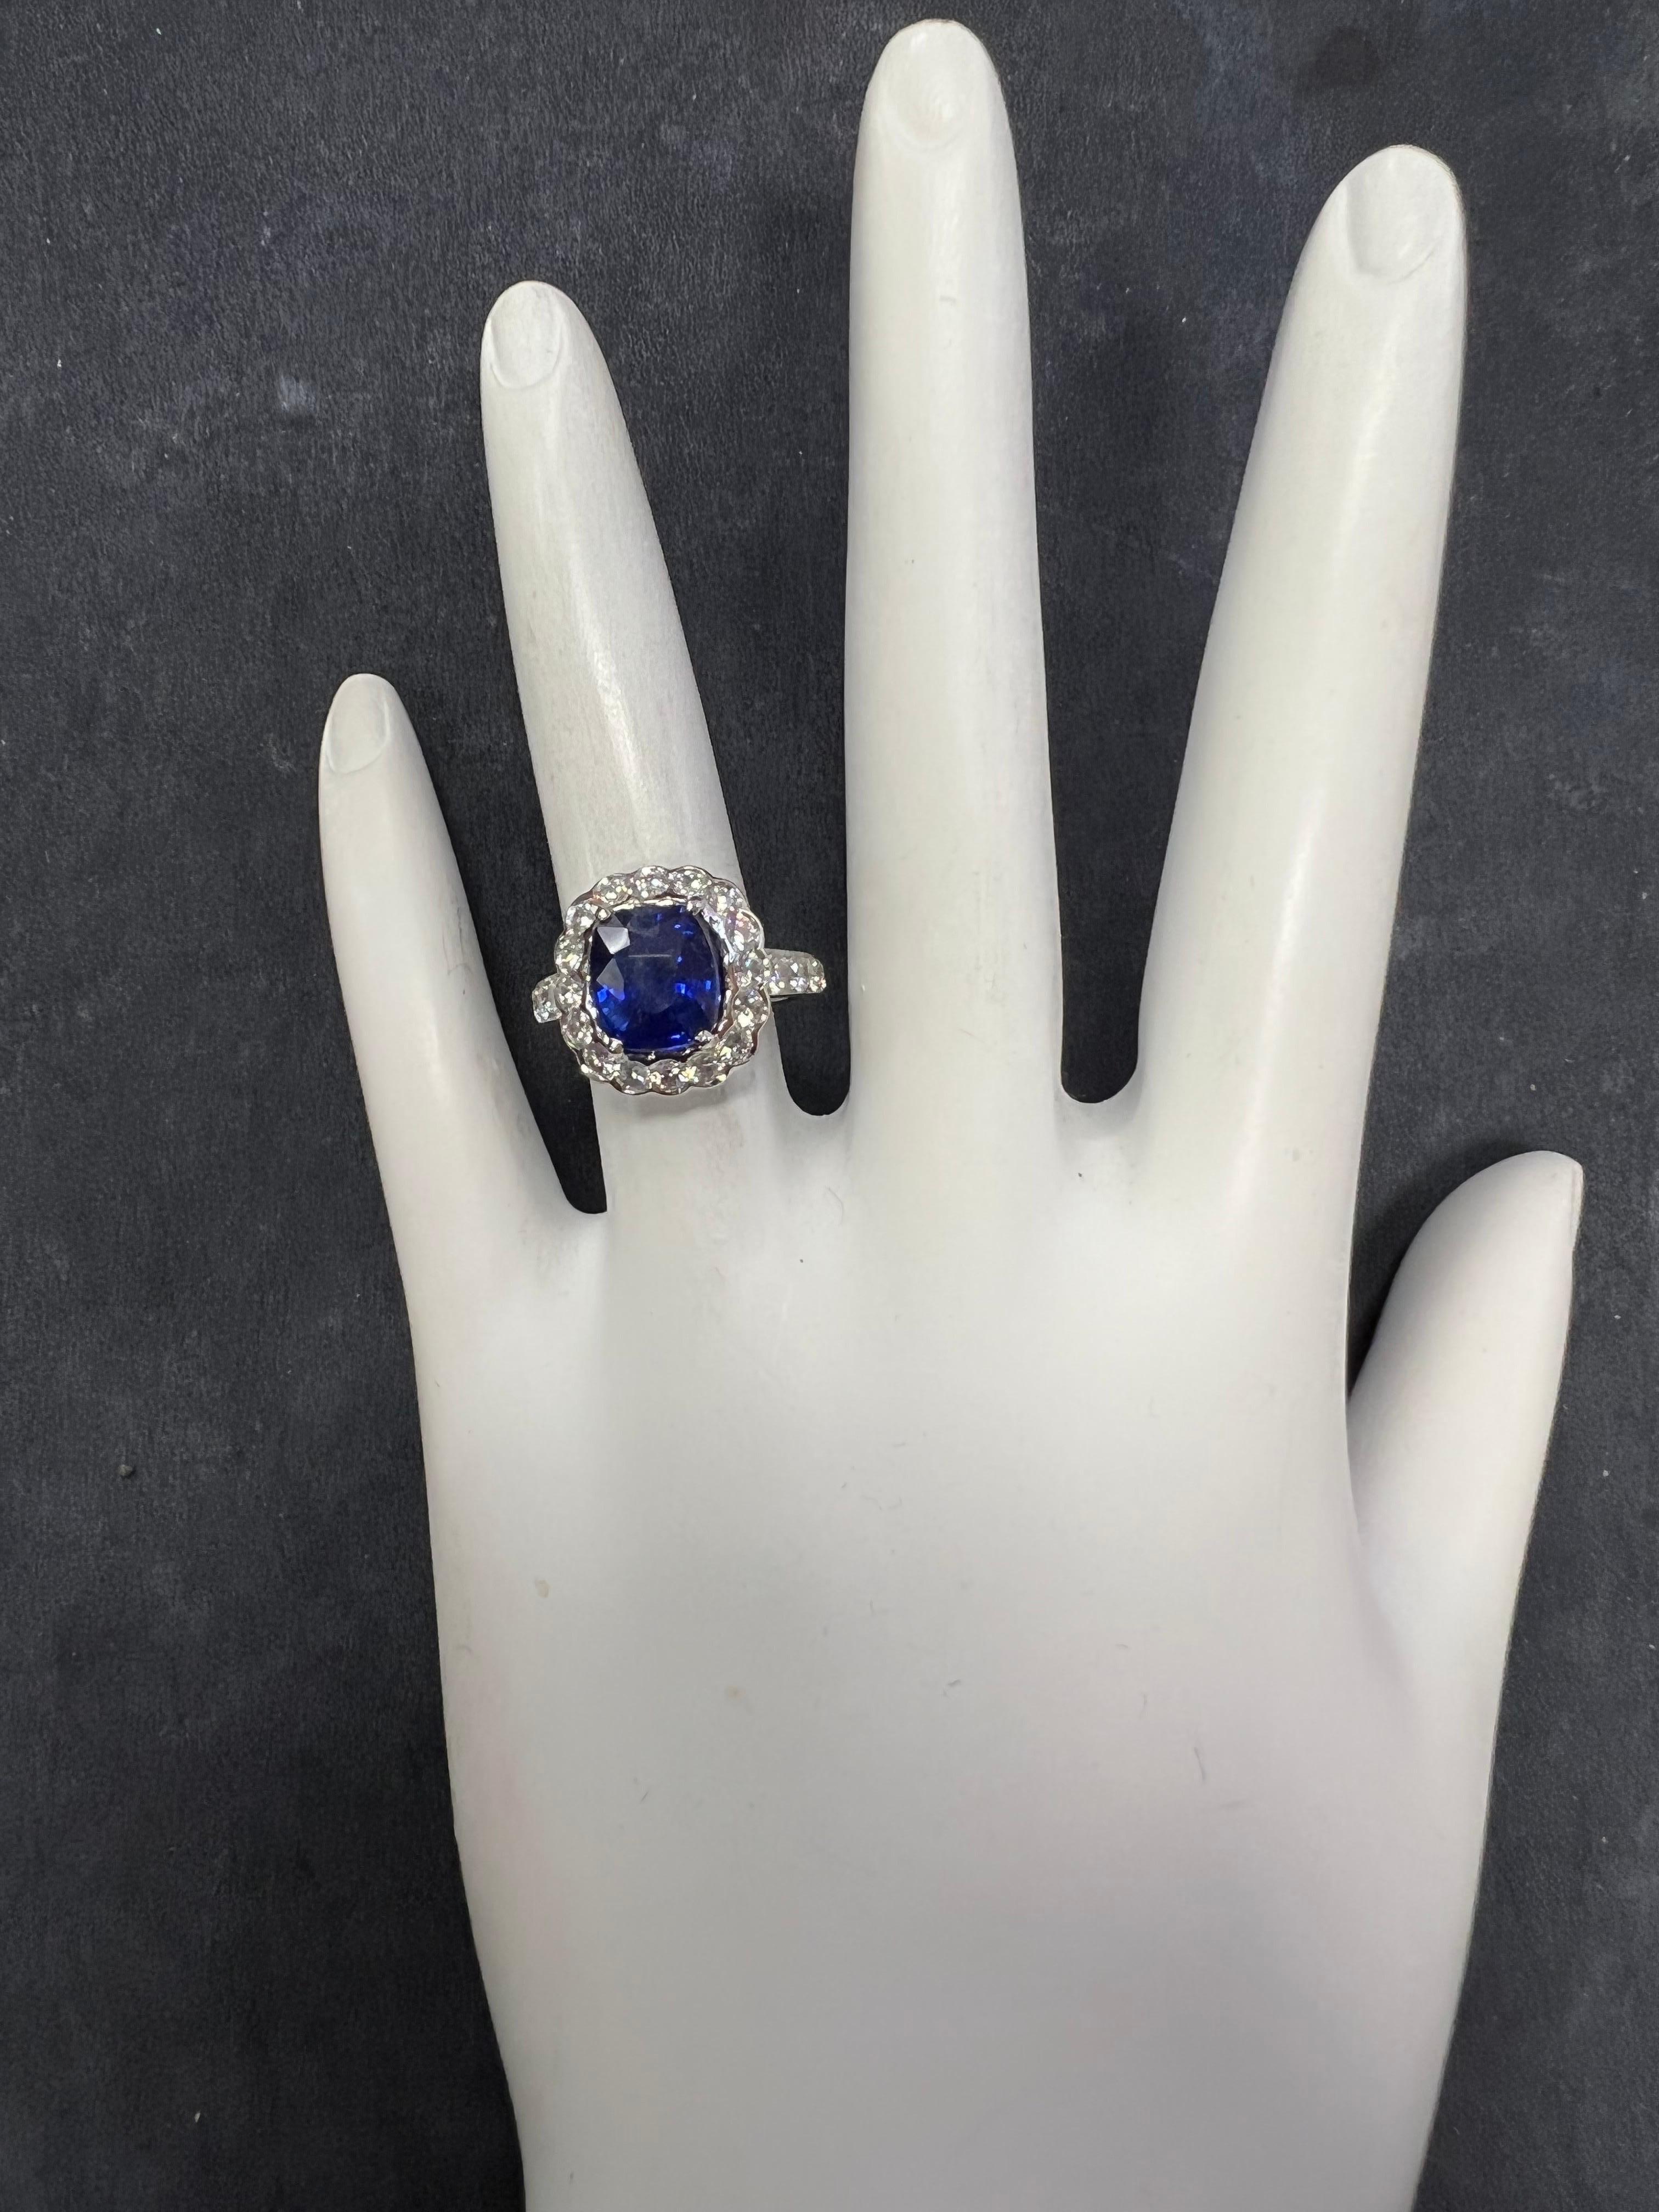 Stunning Modern Platinum Ring.

The 3.15 carat centerstone is a Royal Blue Cushion Shaped heated Sri Lankan Sapphire measuring 8.64x7.53x5.24mm.

The ring is set with 26 natural round brilliant D-E color, VS clarity diamonds weighing 1.14